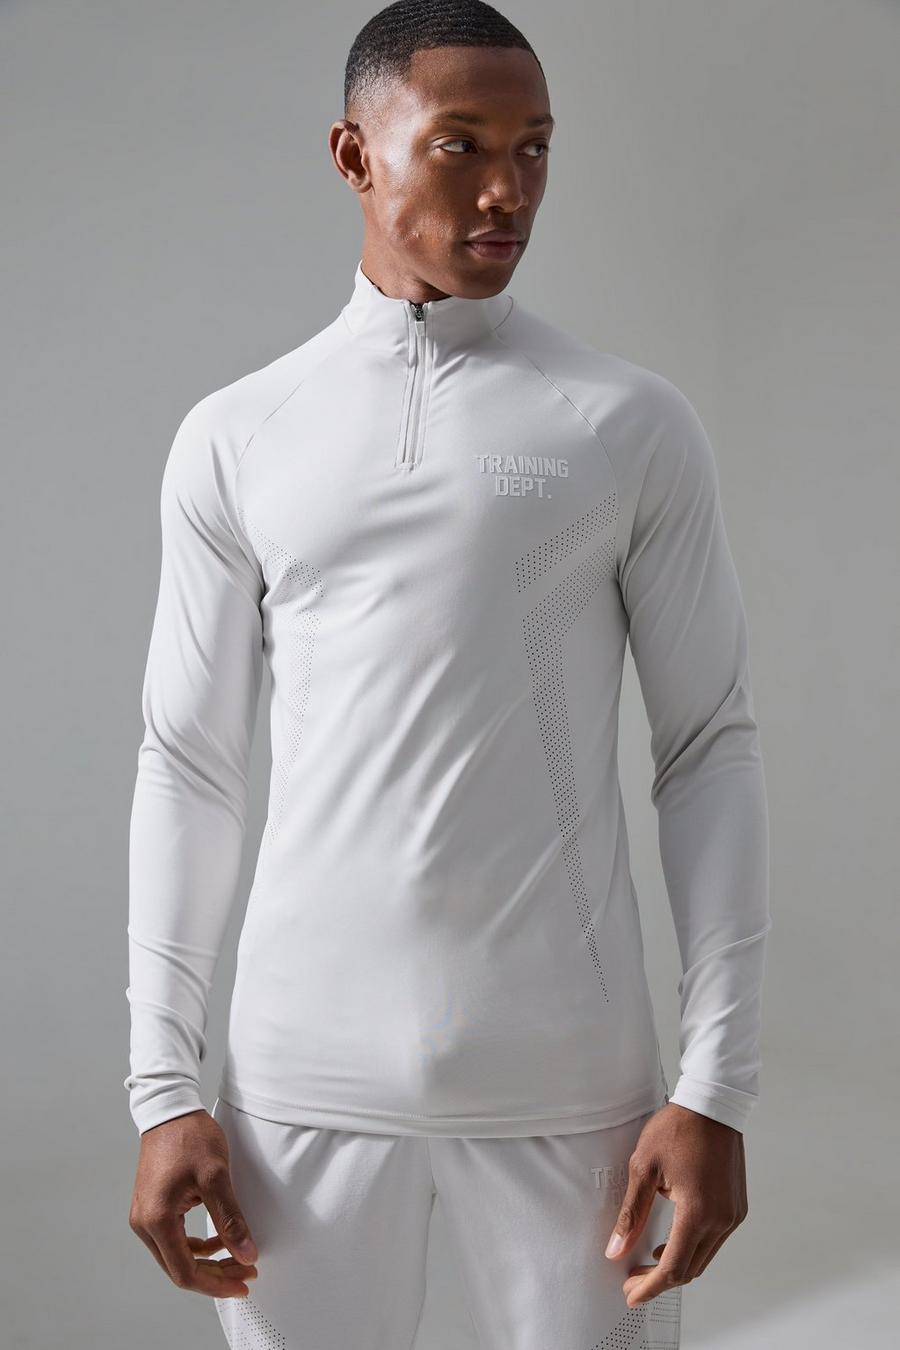 Light grey Active Training Dept Muscle Fit Perforated Quarter Zip Top